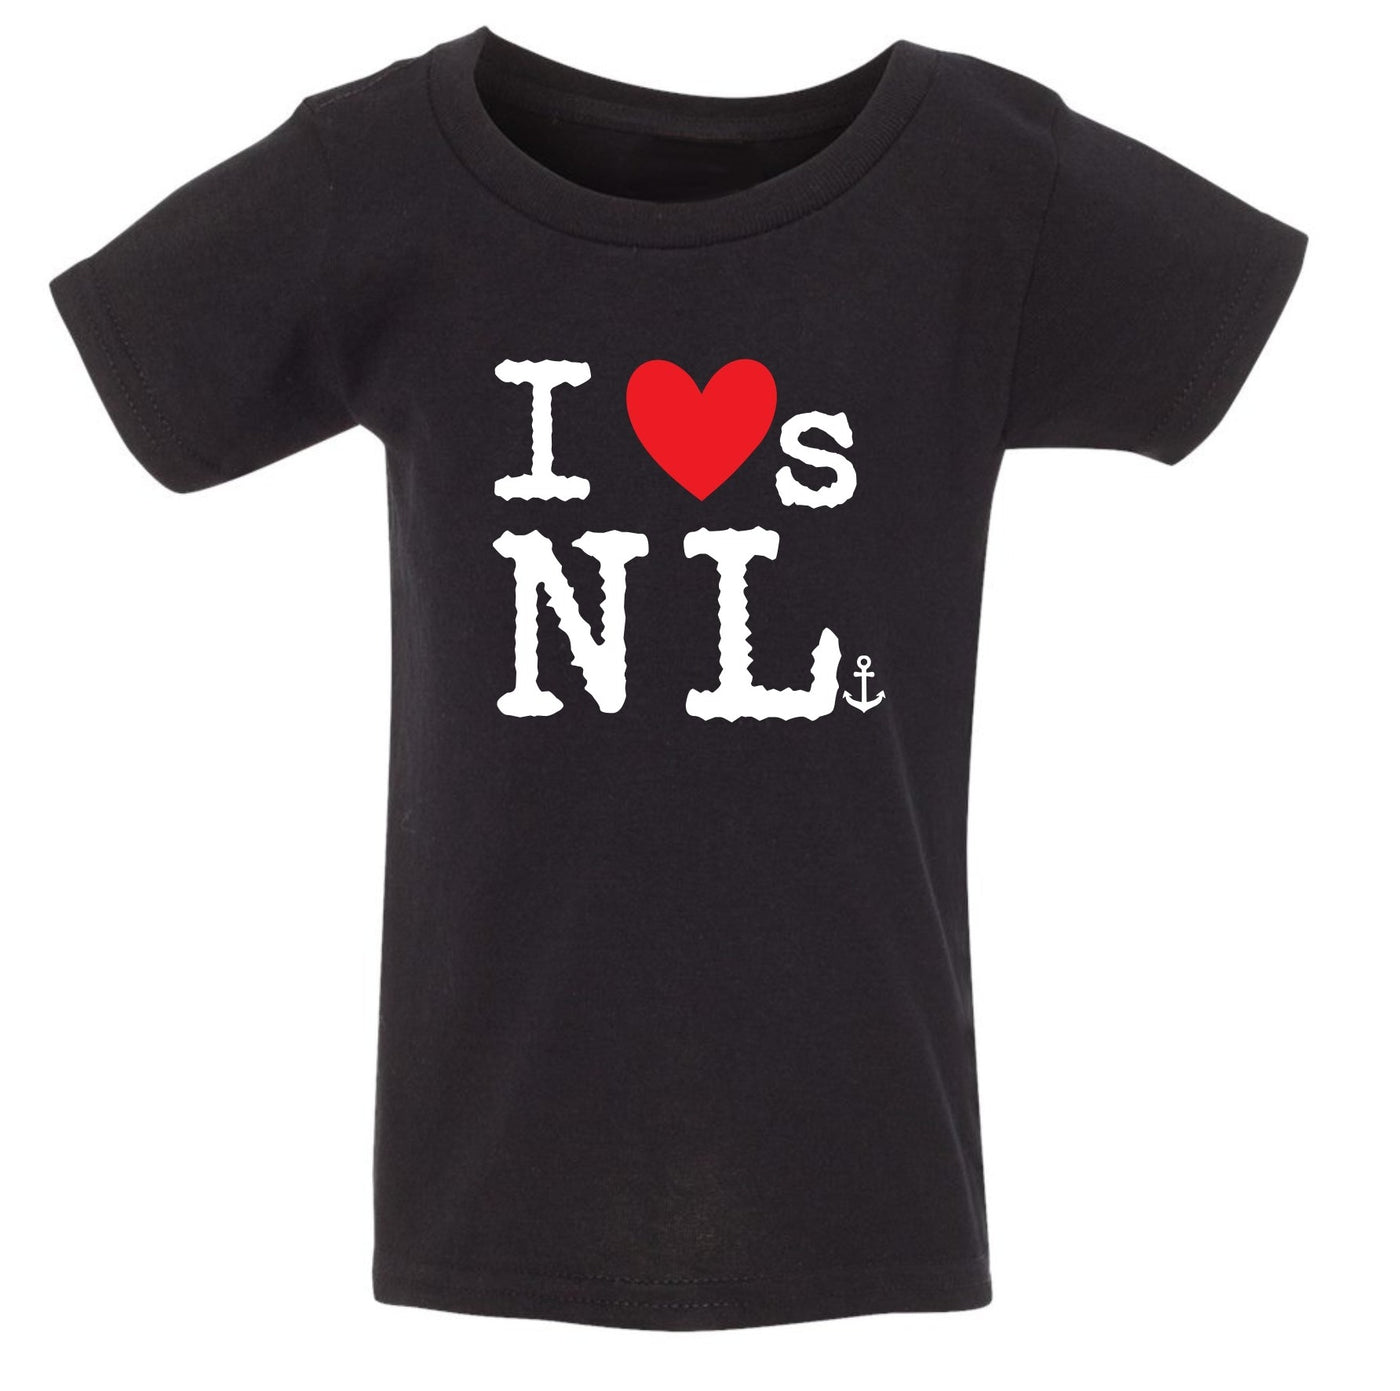 "I Loves NL" Red Heart Toddler/Youth T-Shirt